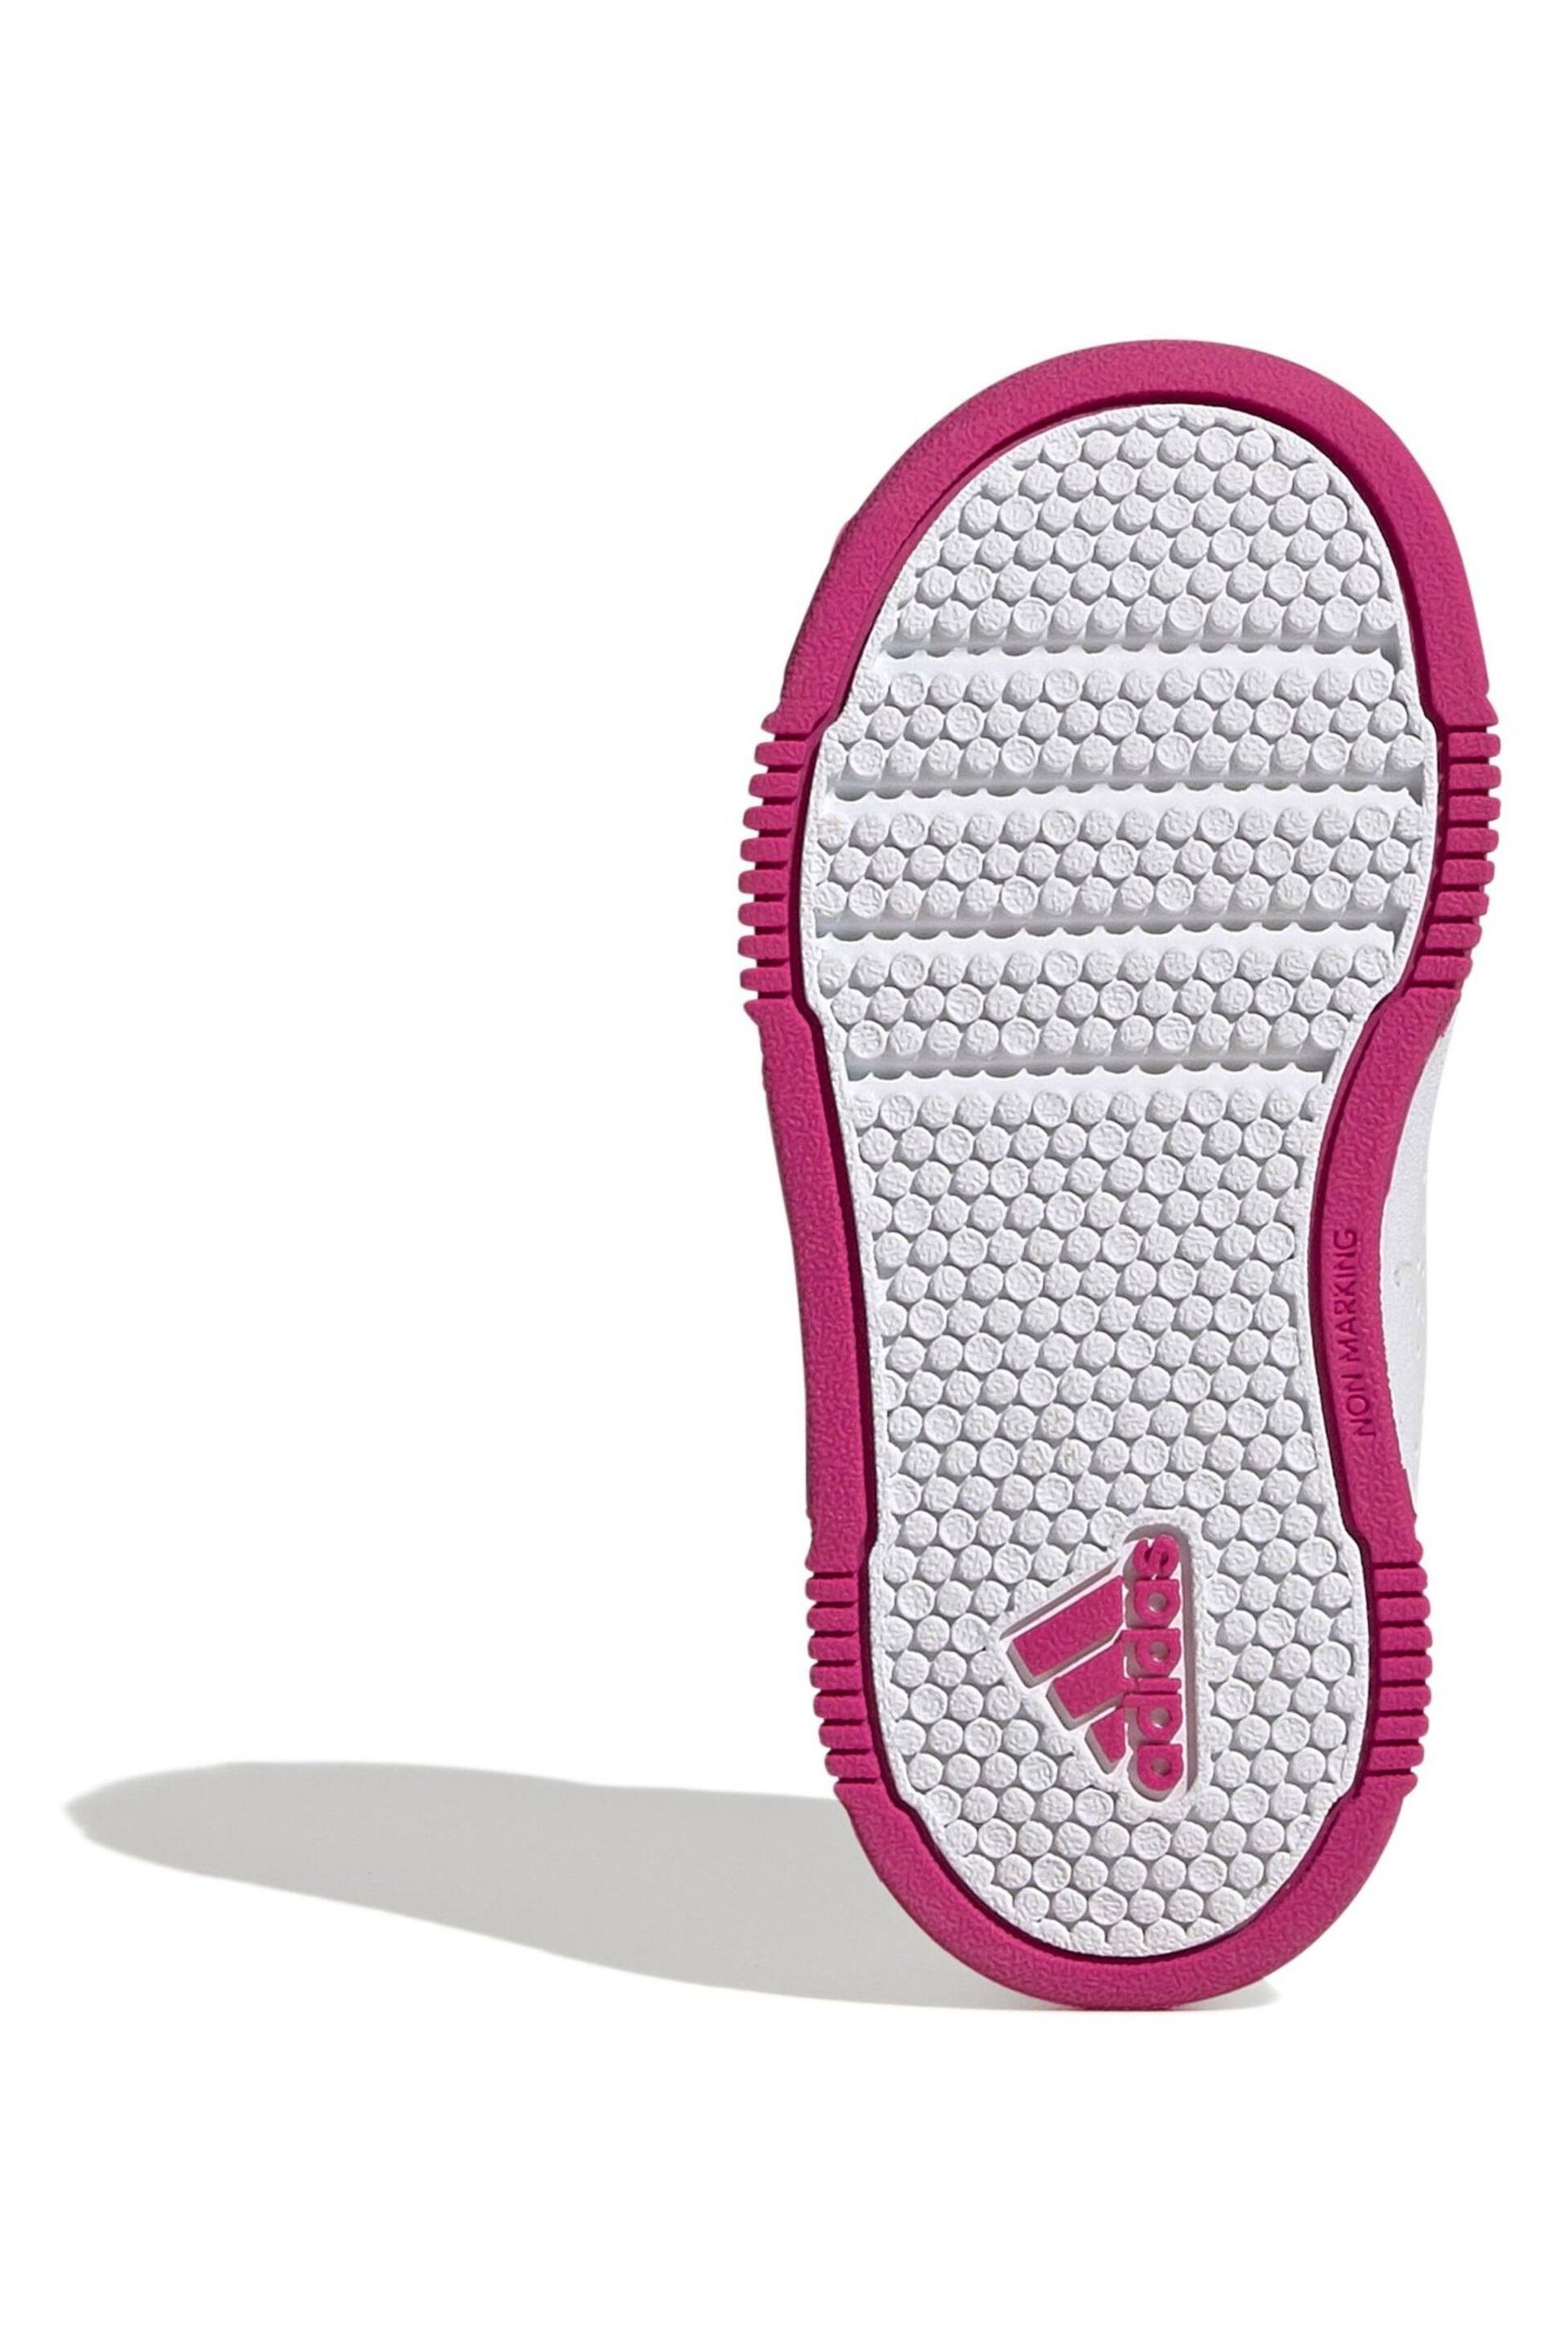 adidas White/Pink Tensaur Hook and Loop Shoes - Image 7 of 9